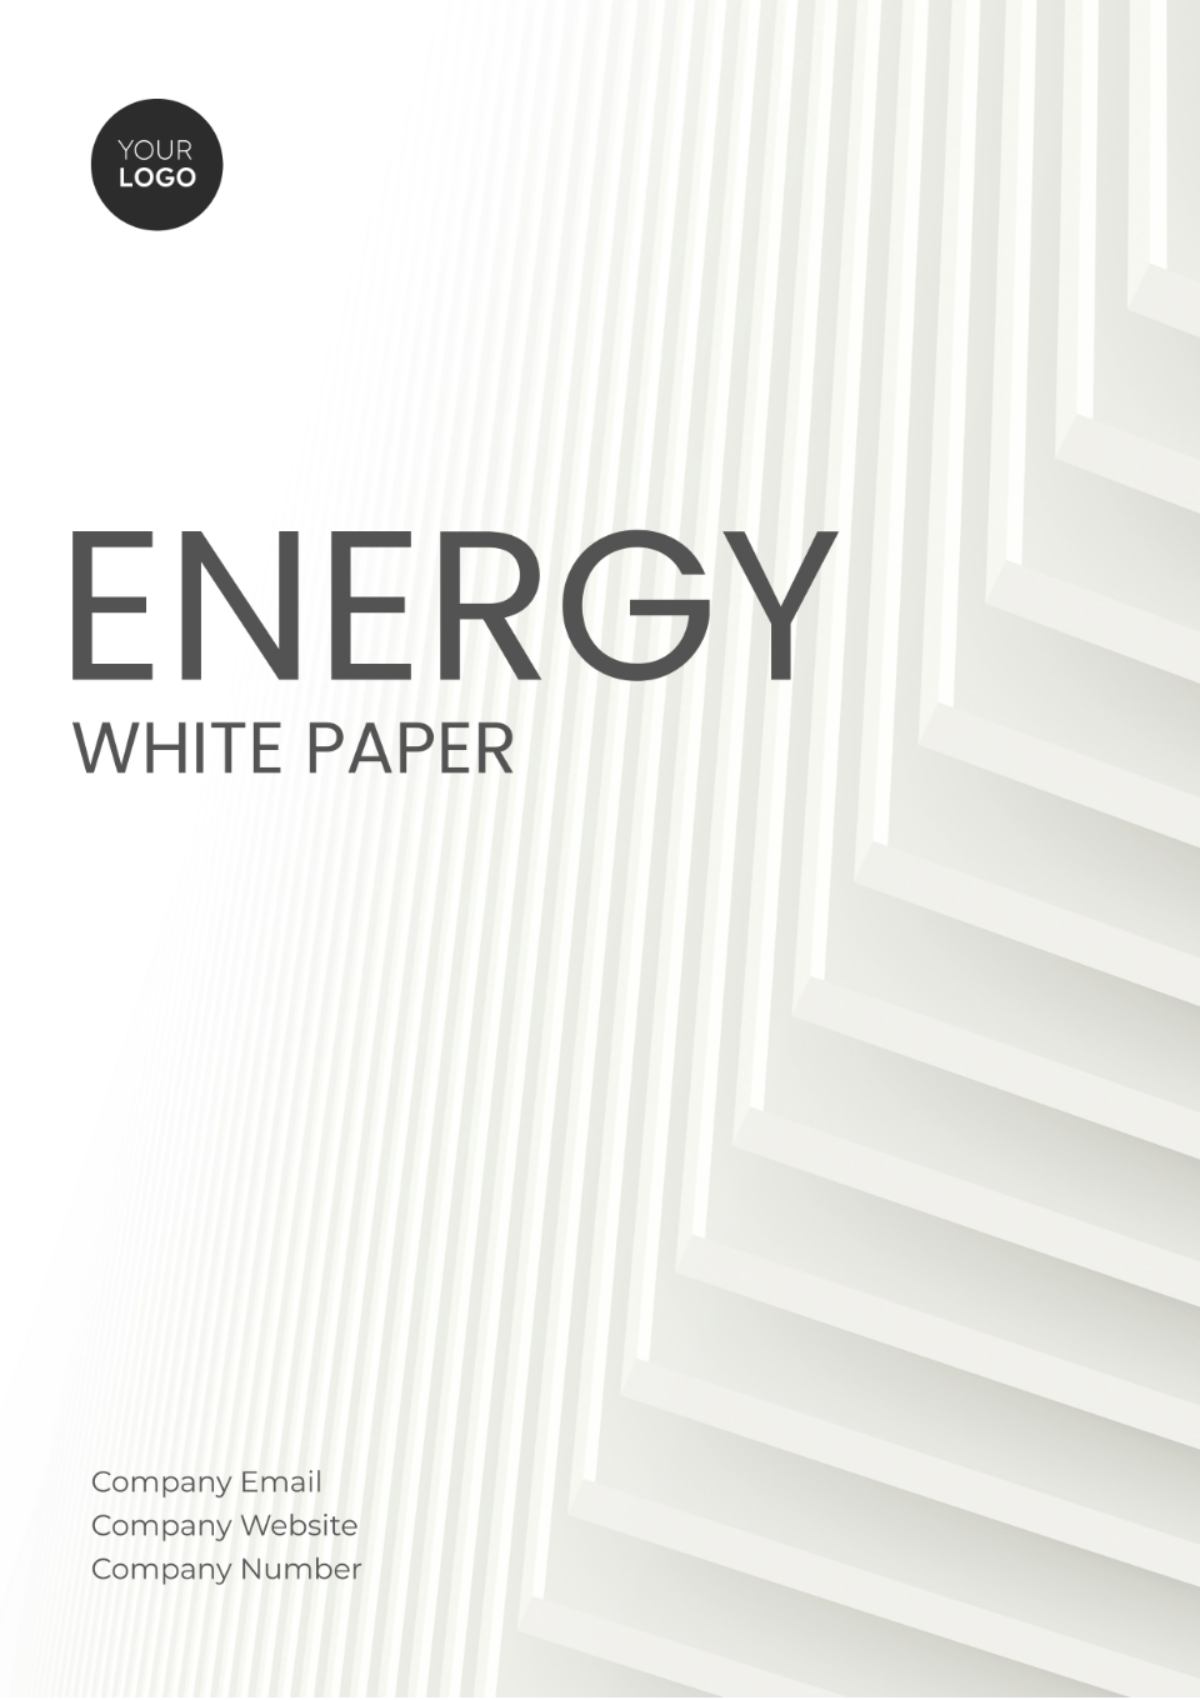 Energy White Paper Template